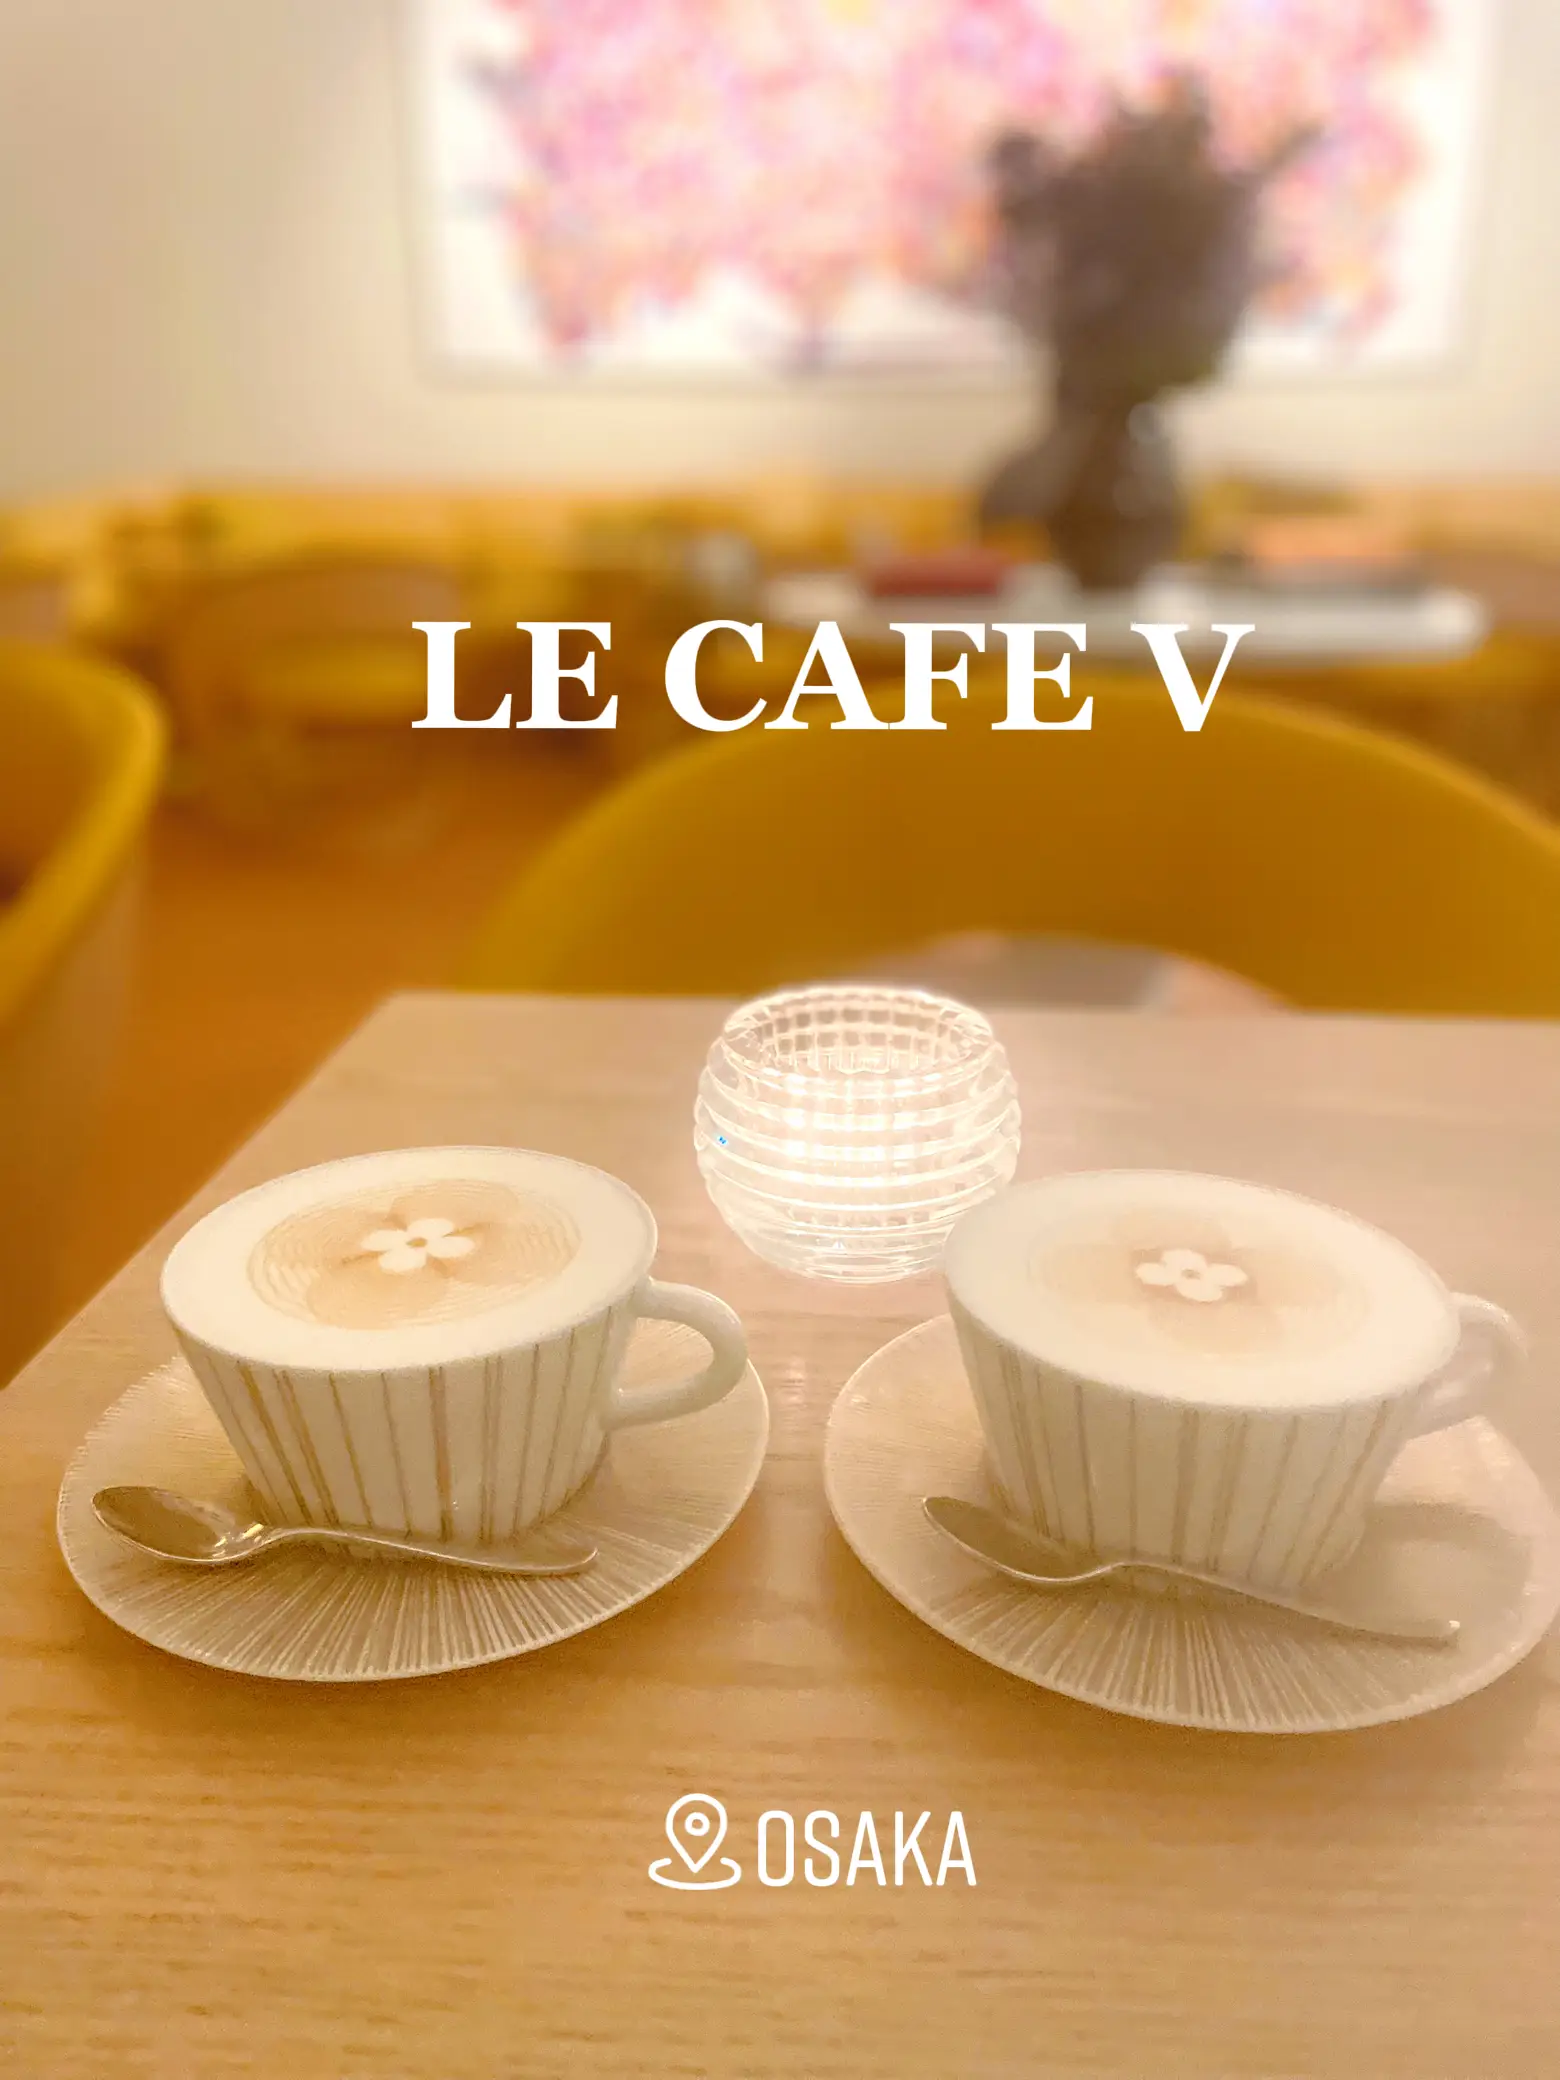 Osaka 】 Louis Vuitton Cafe where you can experience a special